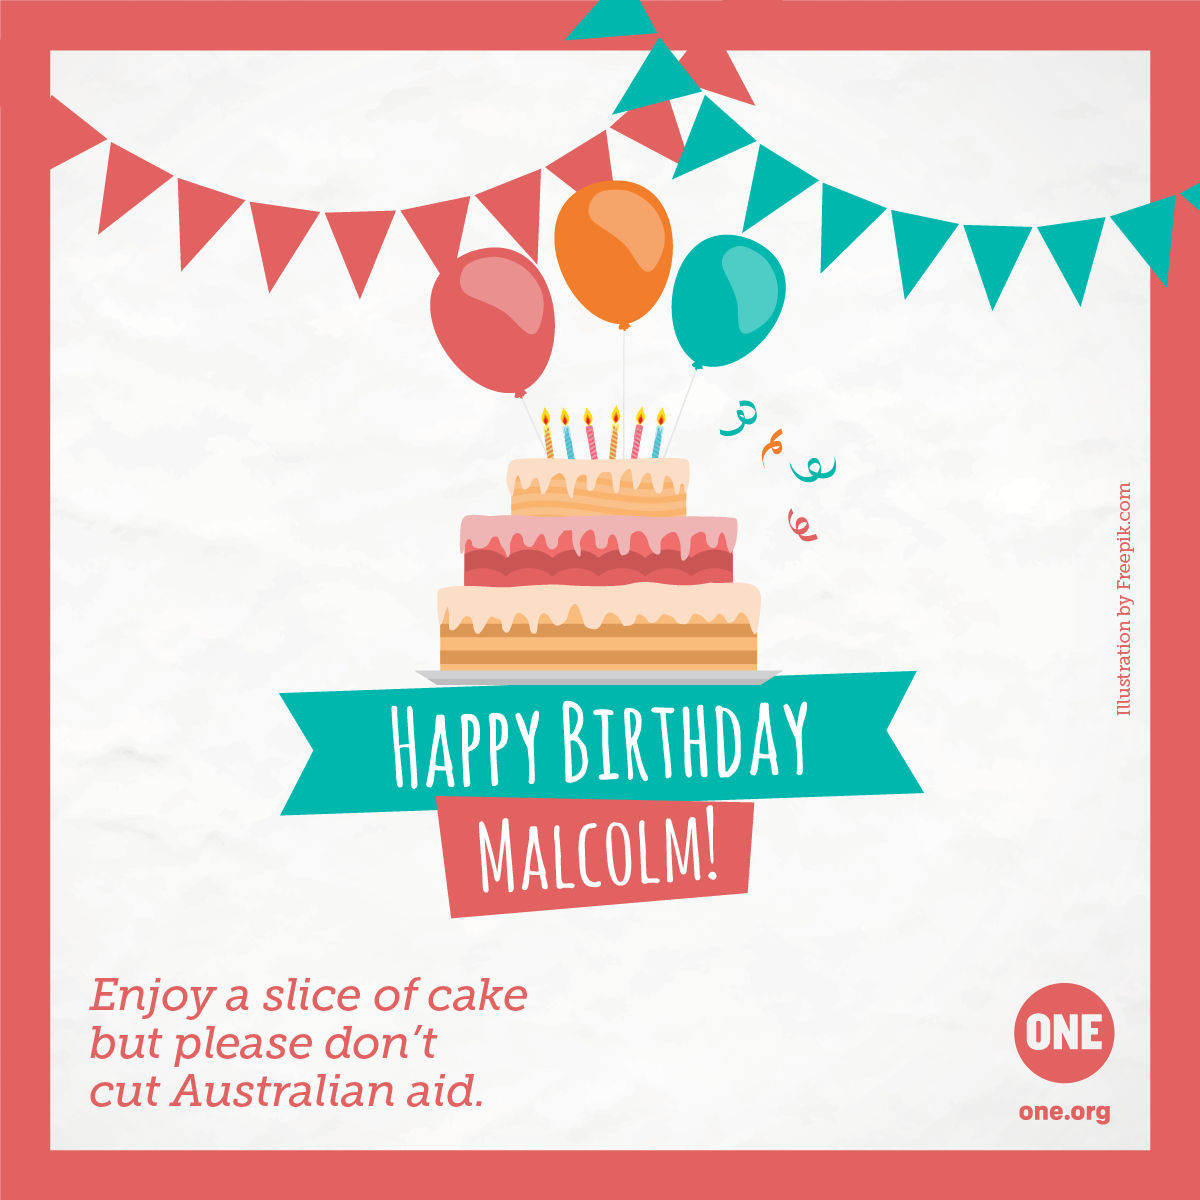 YOUR birthday messages to Australia PM Malcolm Turnbull